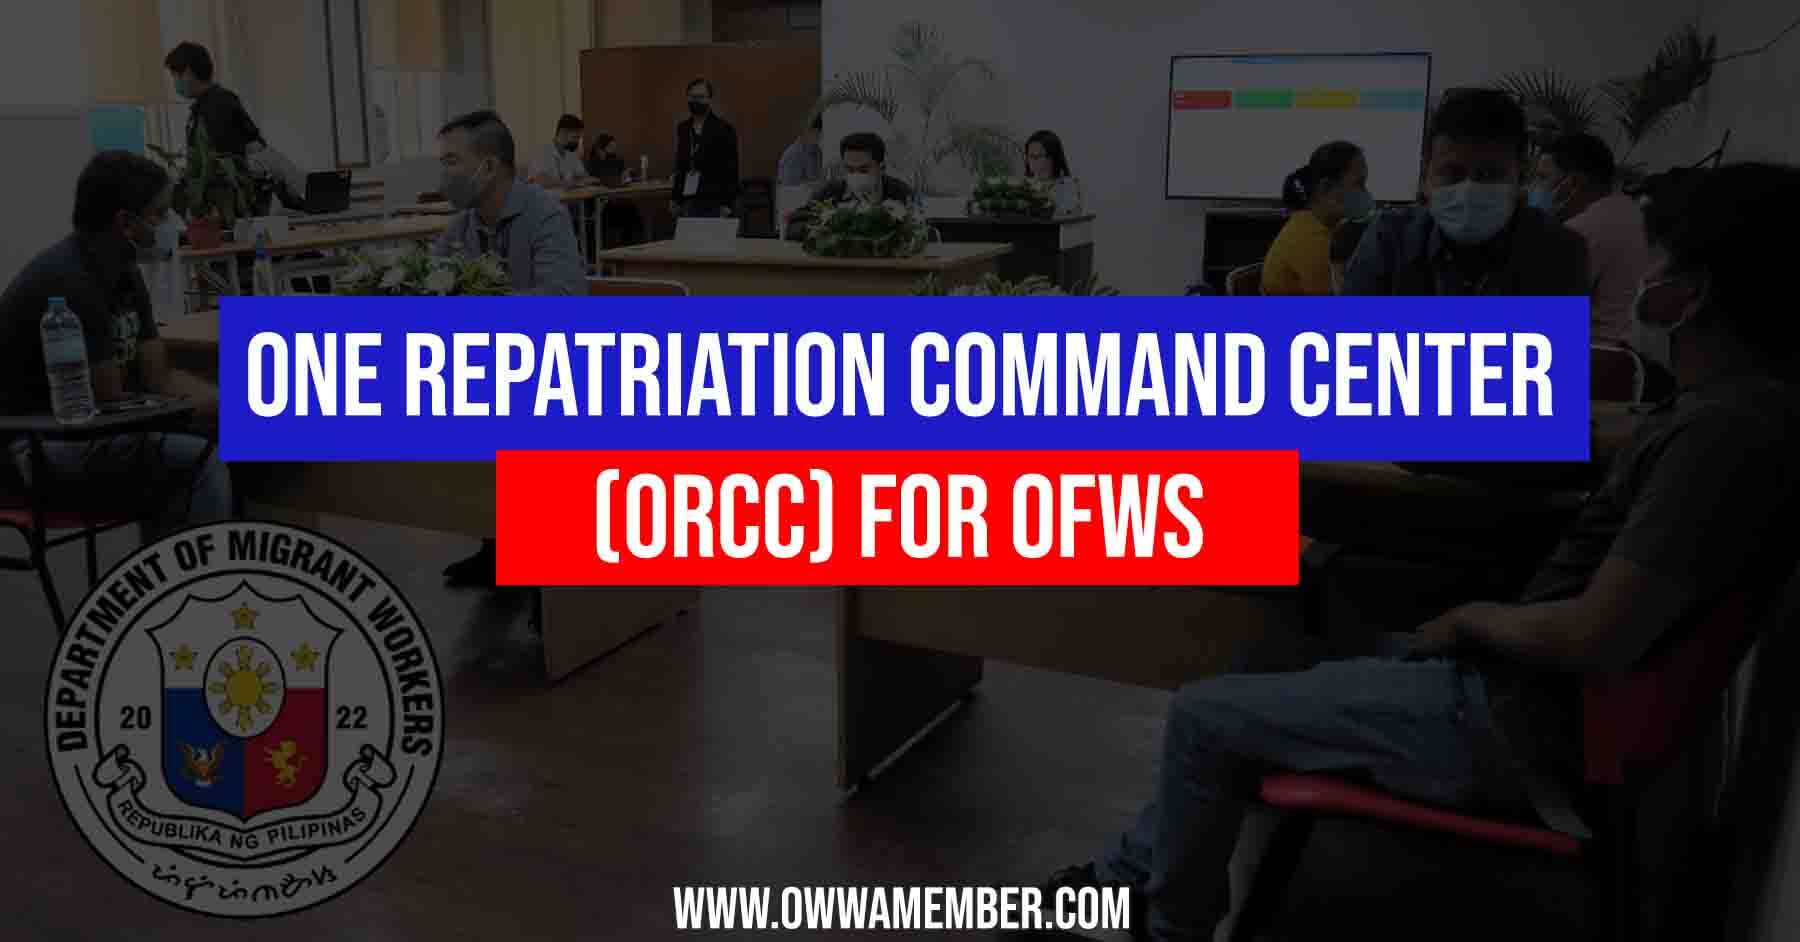 one repatriation command center for ofws by department of migrant workers